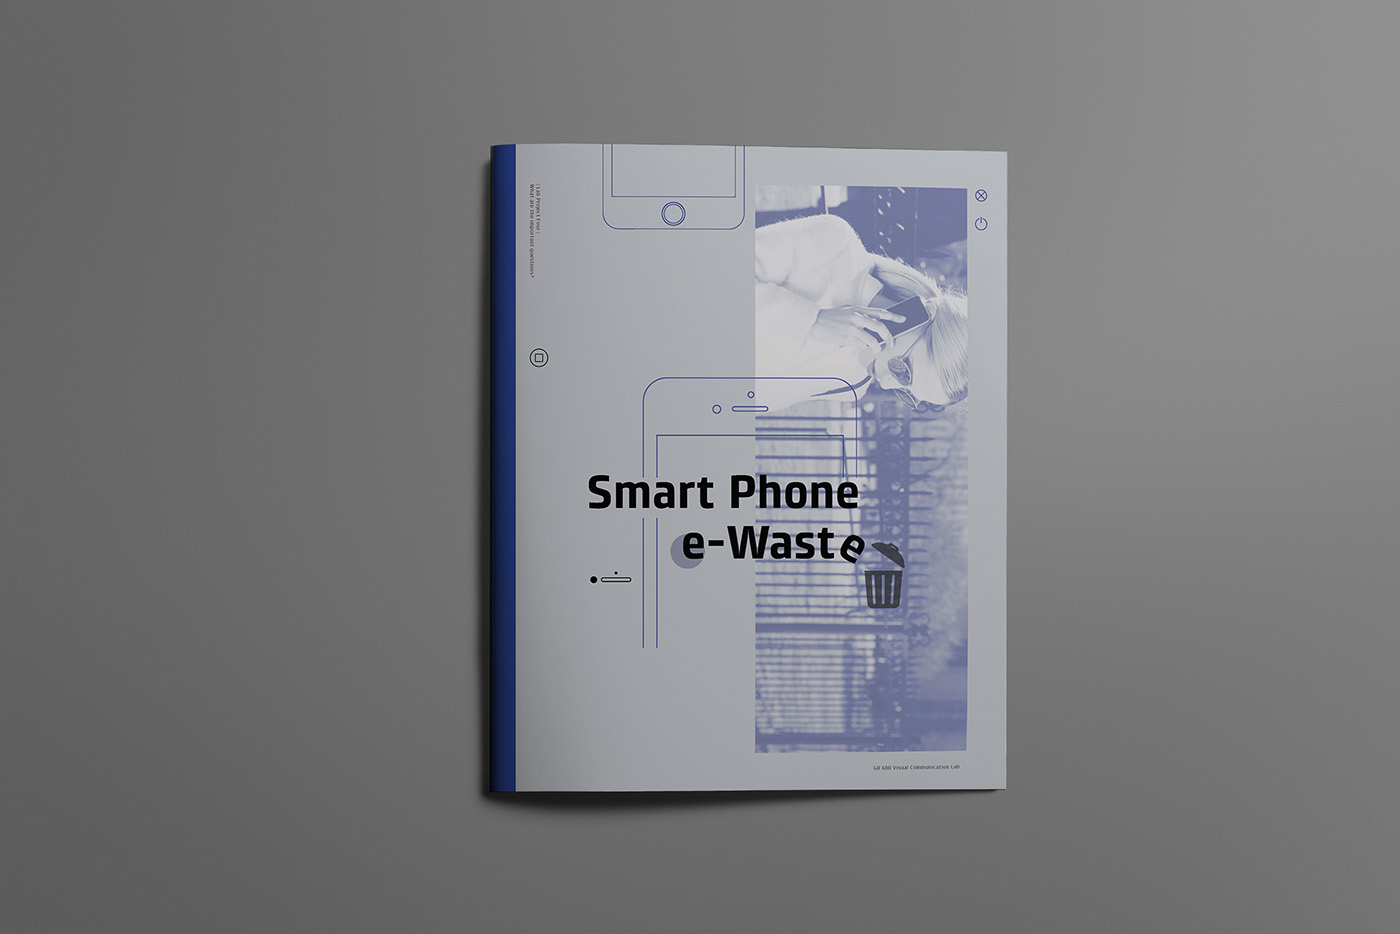 Adobe Portfolio Thesis Proposal smart phone thesis student project e-waste